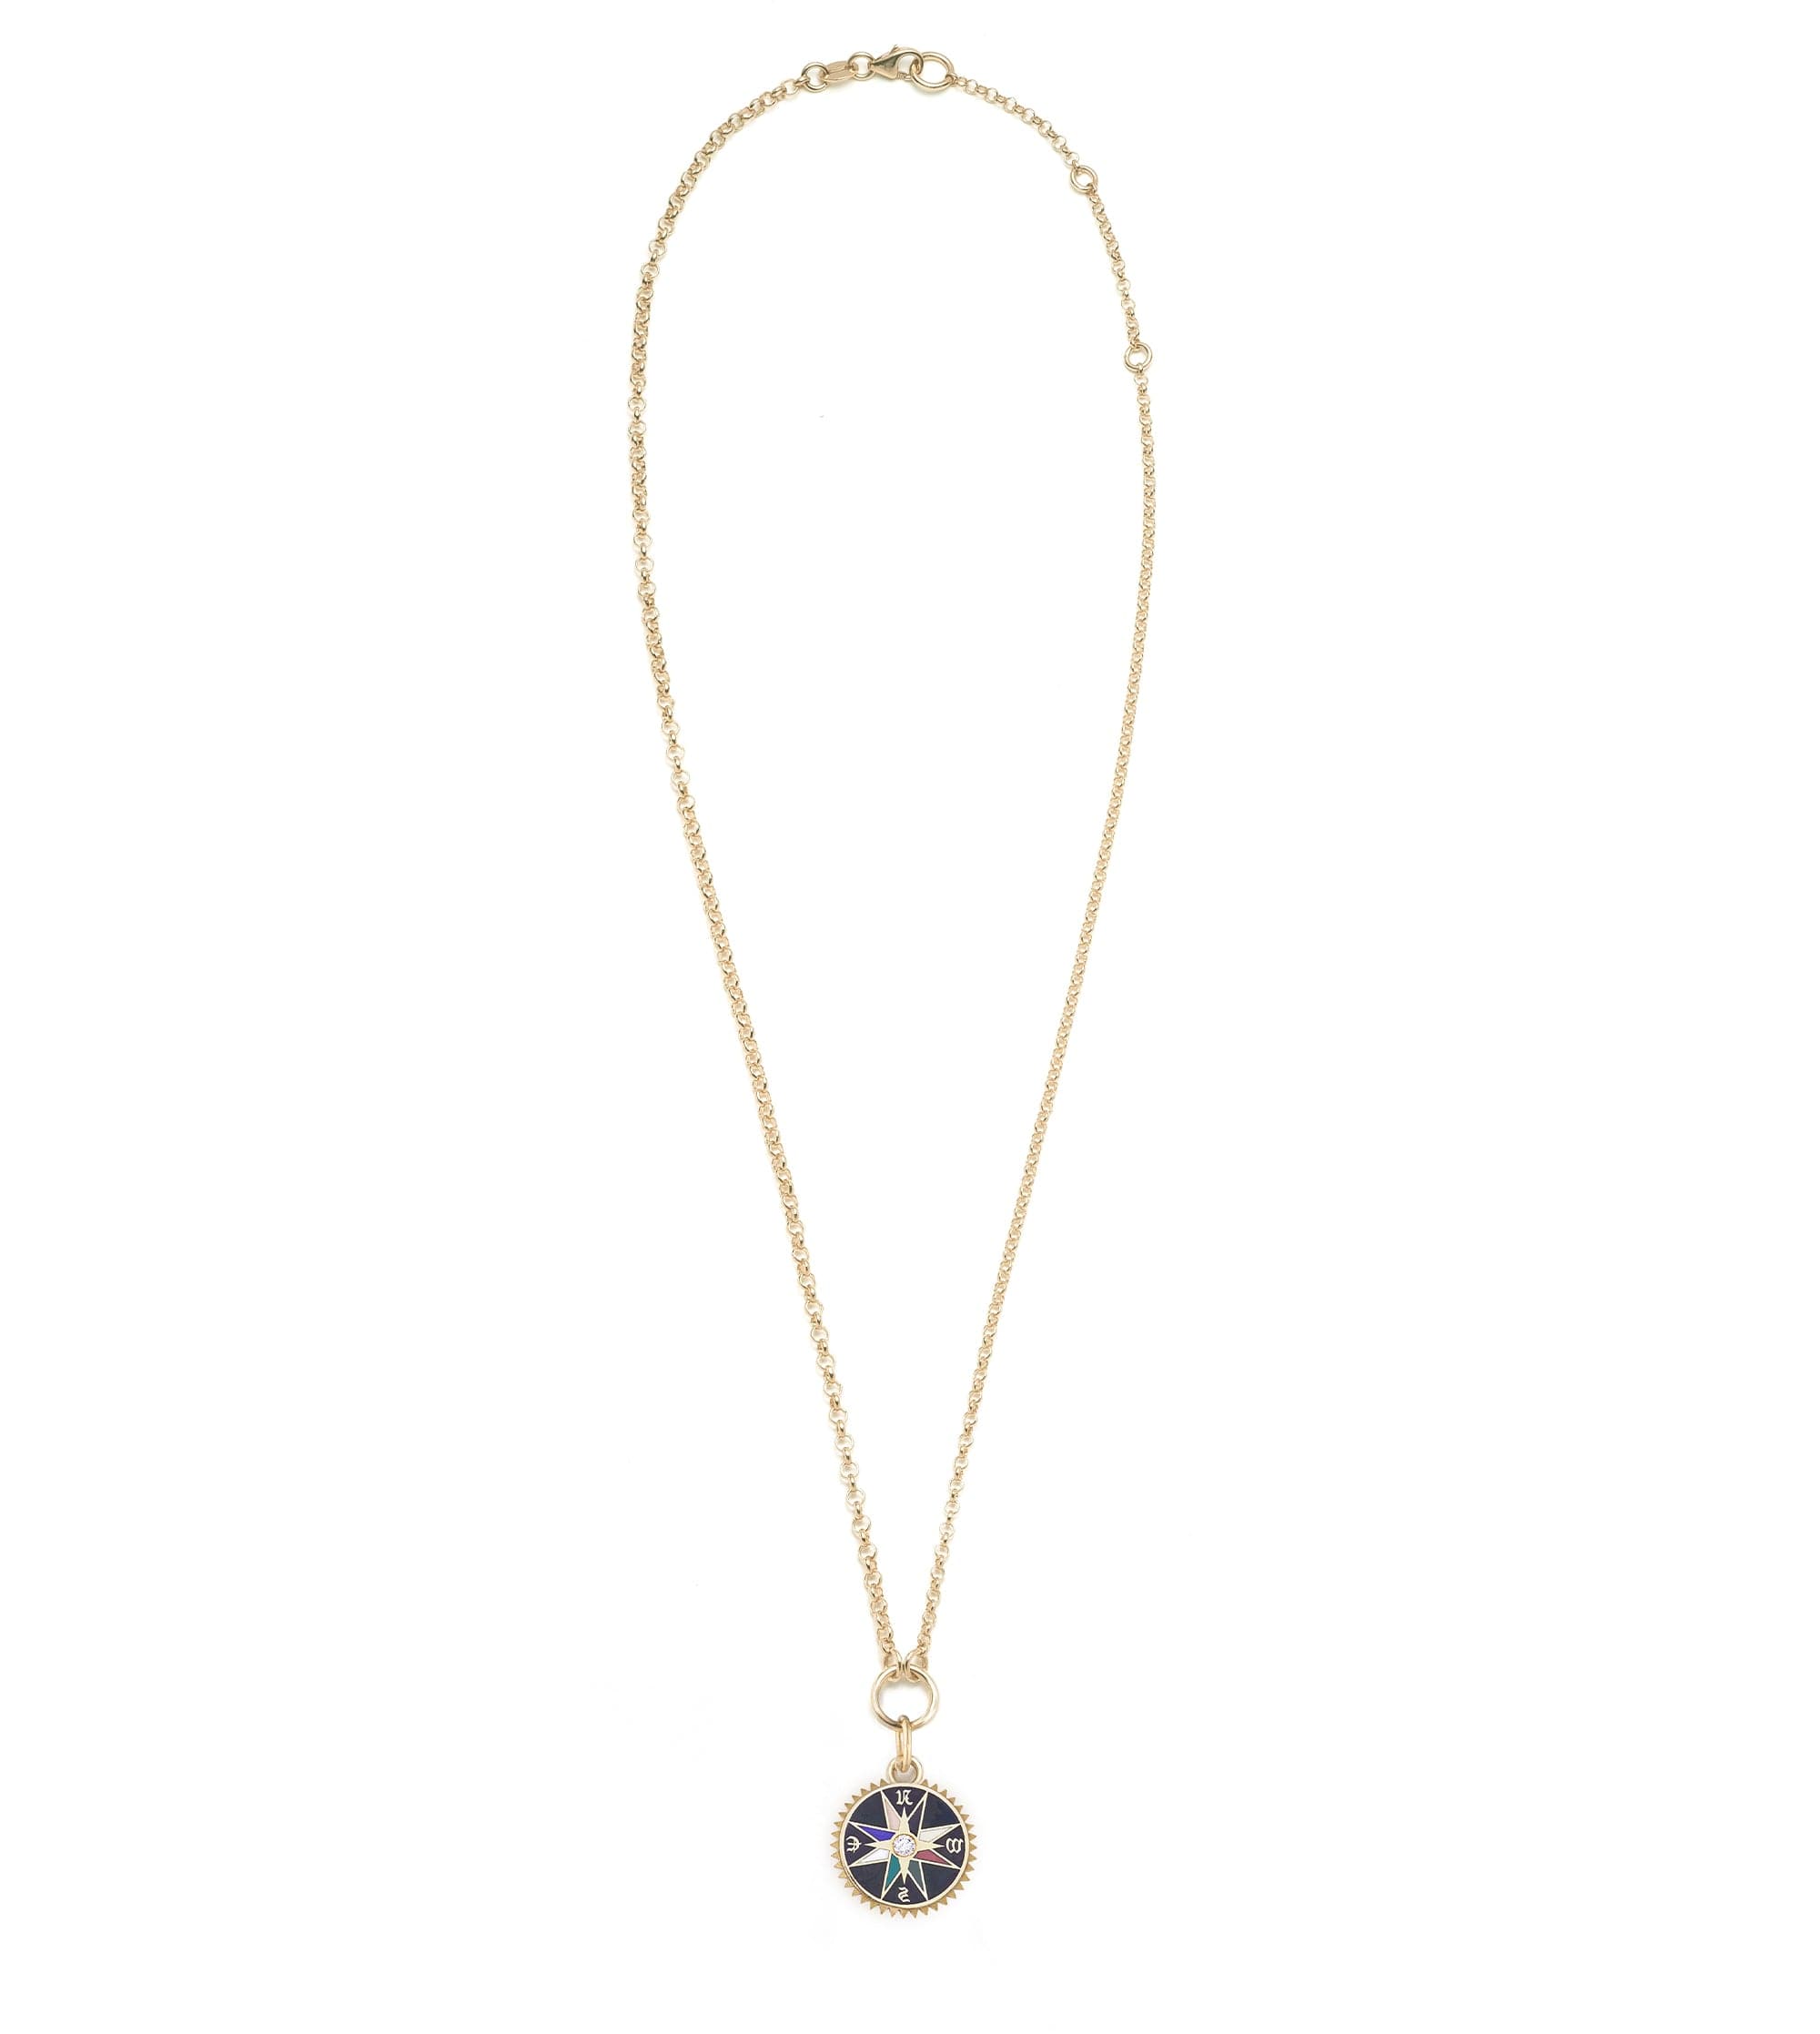 Internal Compass : Black Champleve Small Belcher Chain Necklace